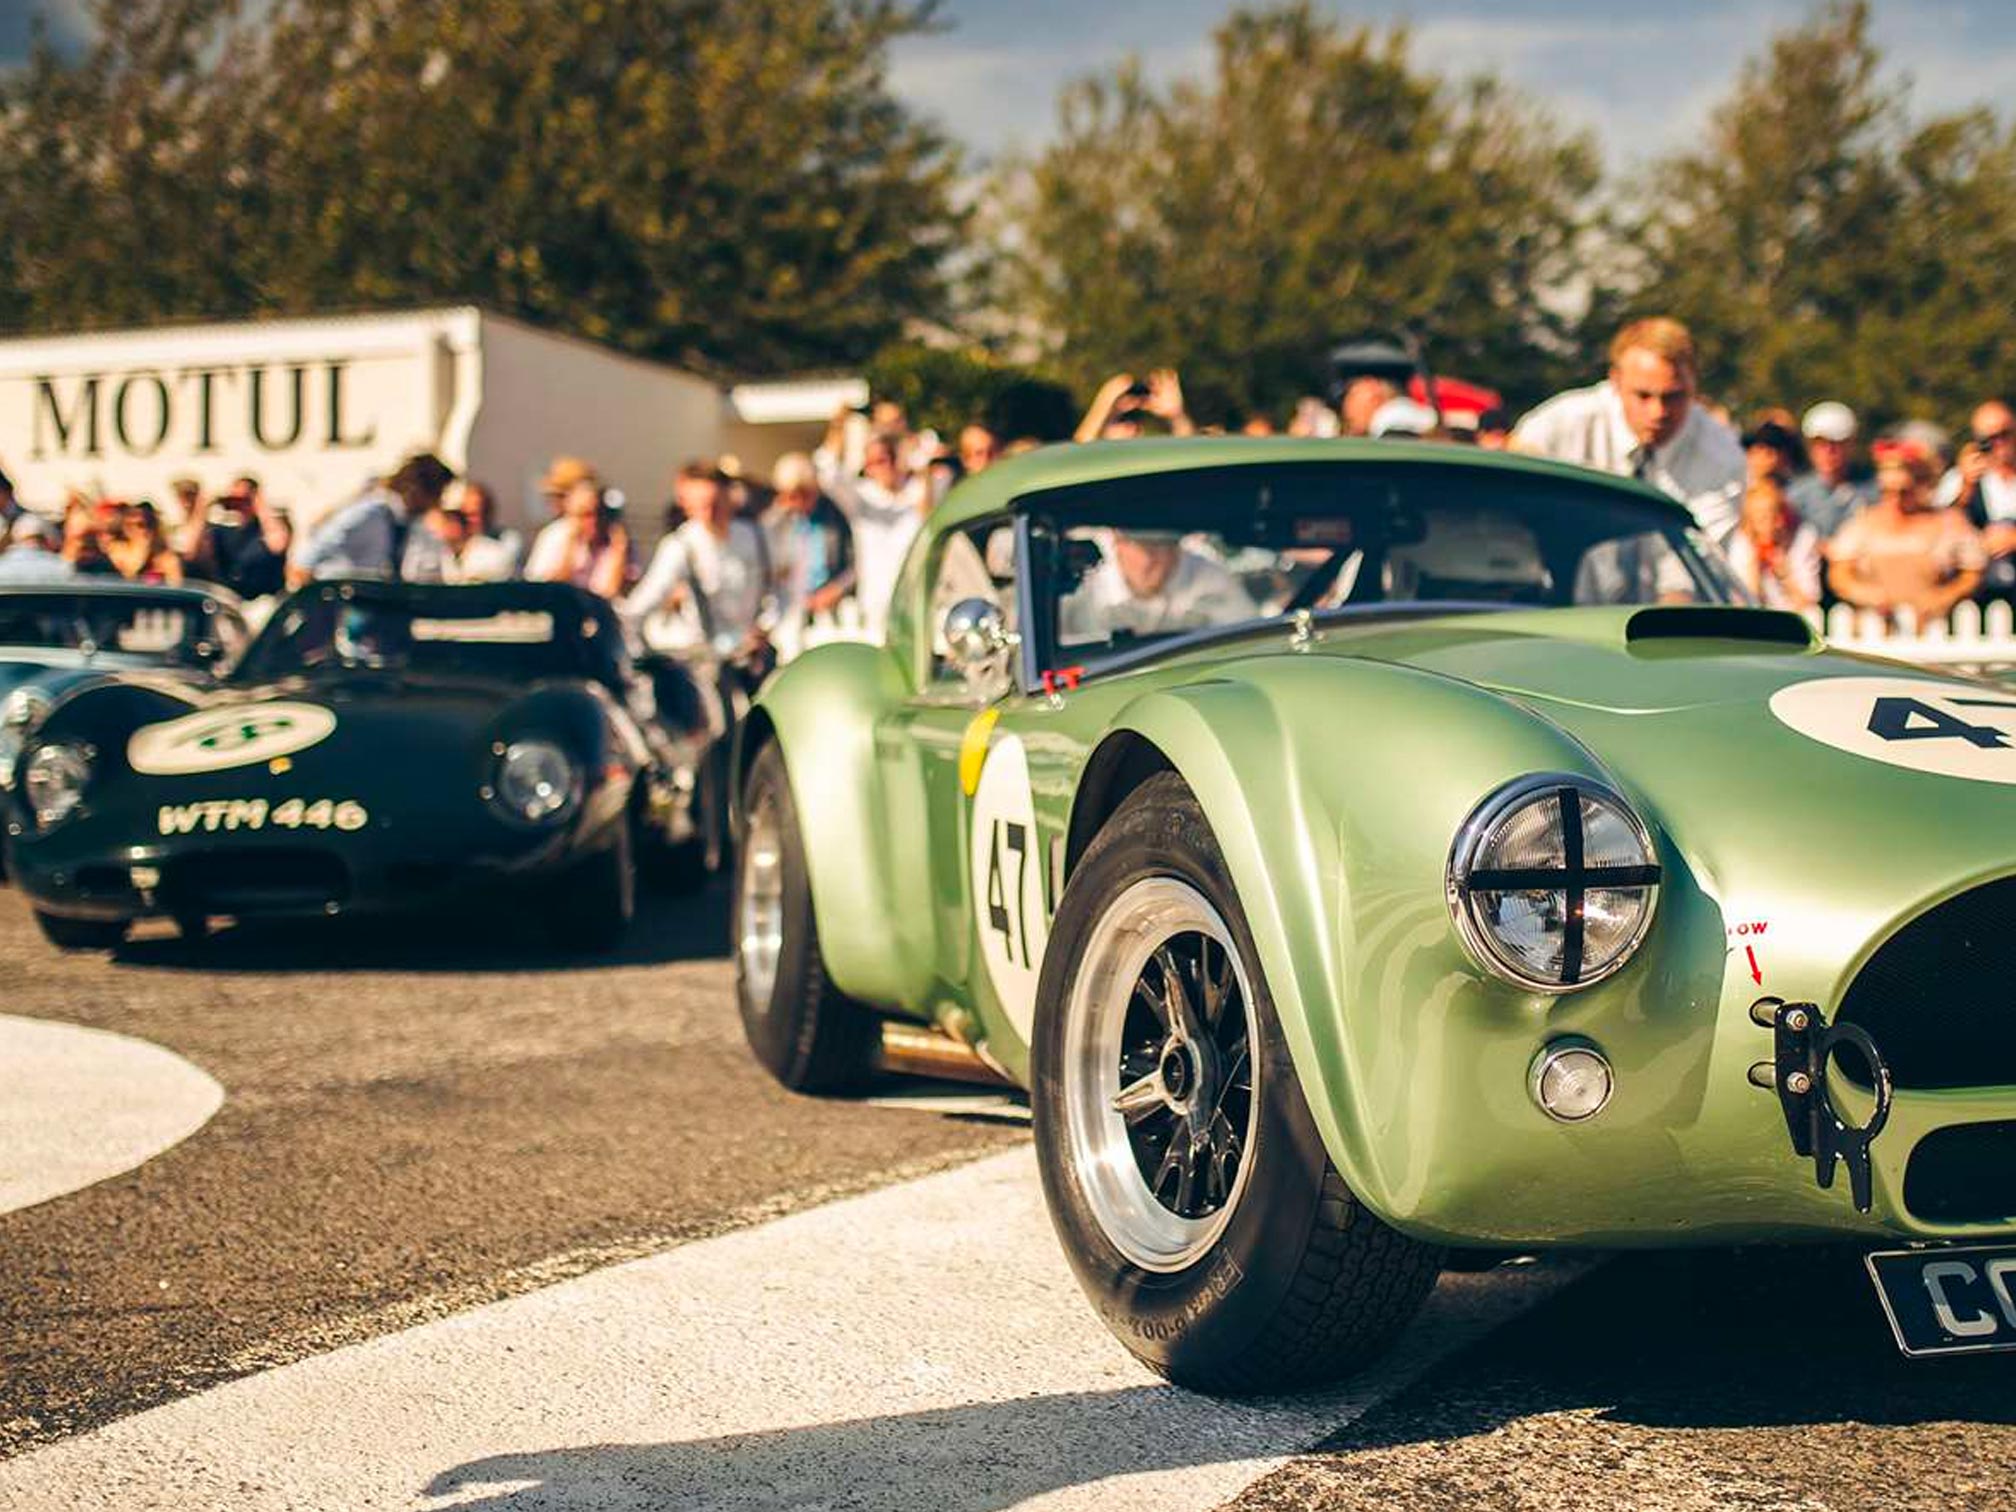 The Goodwood Revival